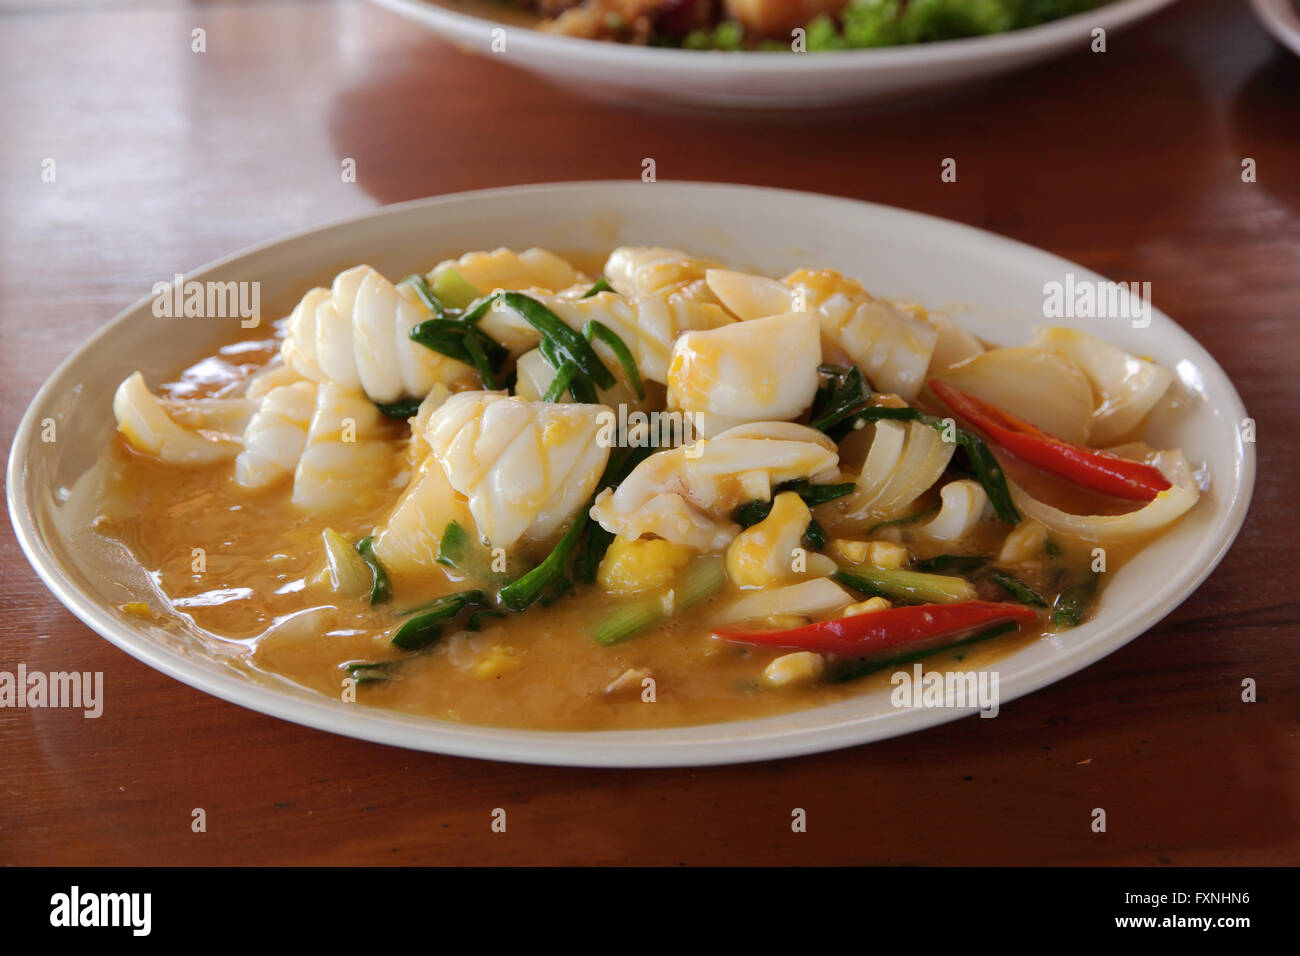 Stir fried squid with salted eggs on wood table Stock Photo